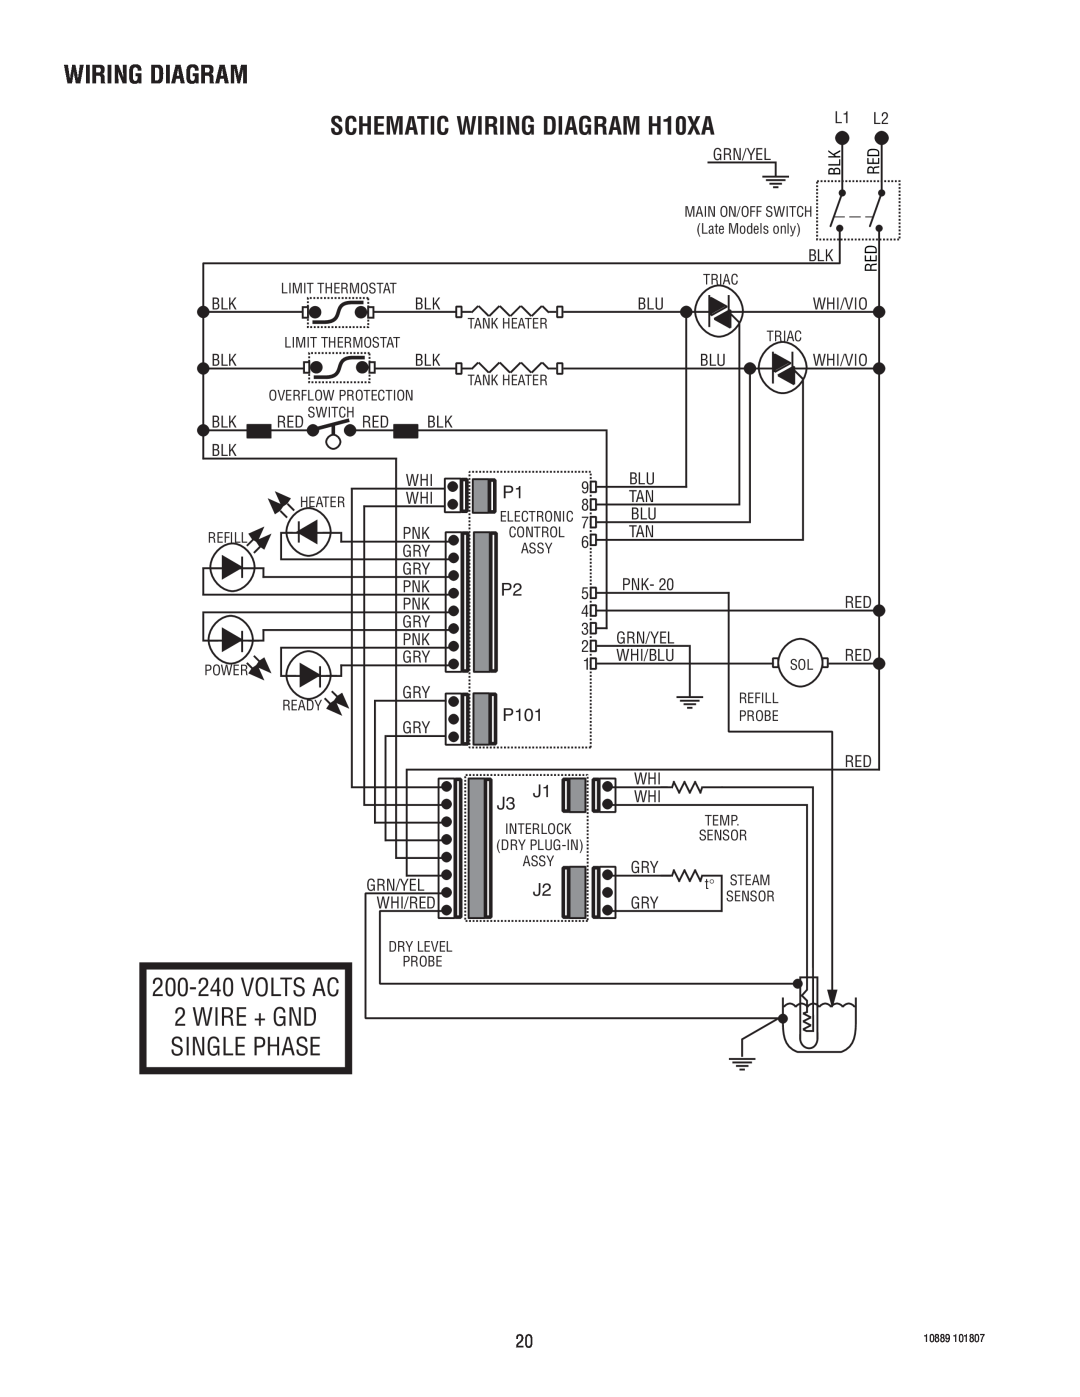 Bunn manual WIRING DIAGRAM SCHEMATIC WIRING DIAGRAM H10XA, Volts Ac, Wire + Gnd Single Phase, P101 